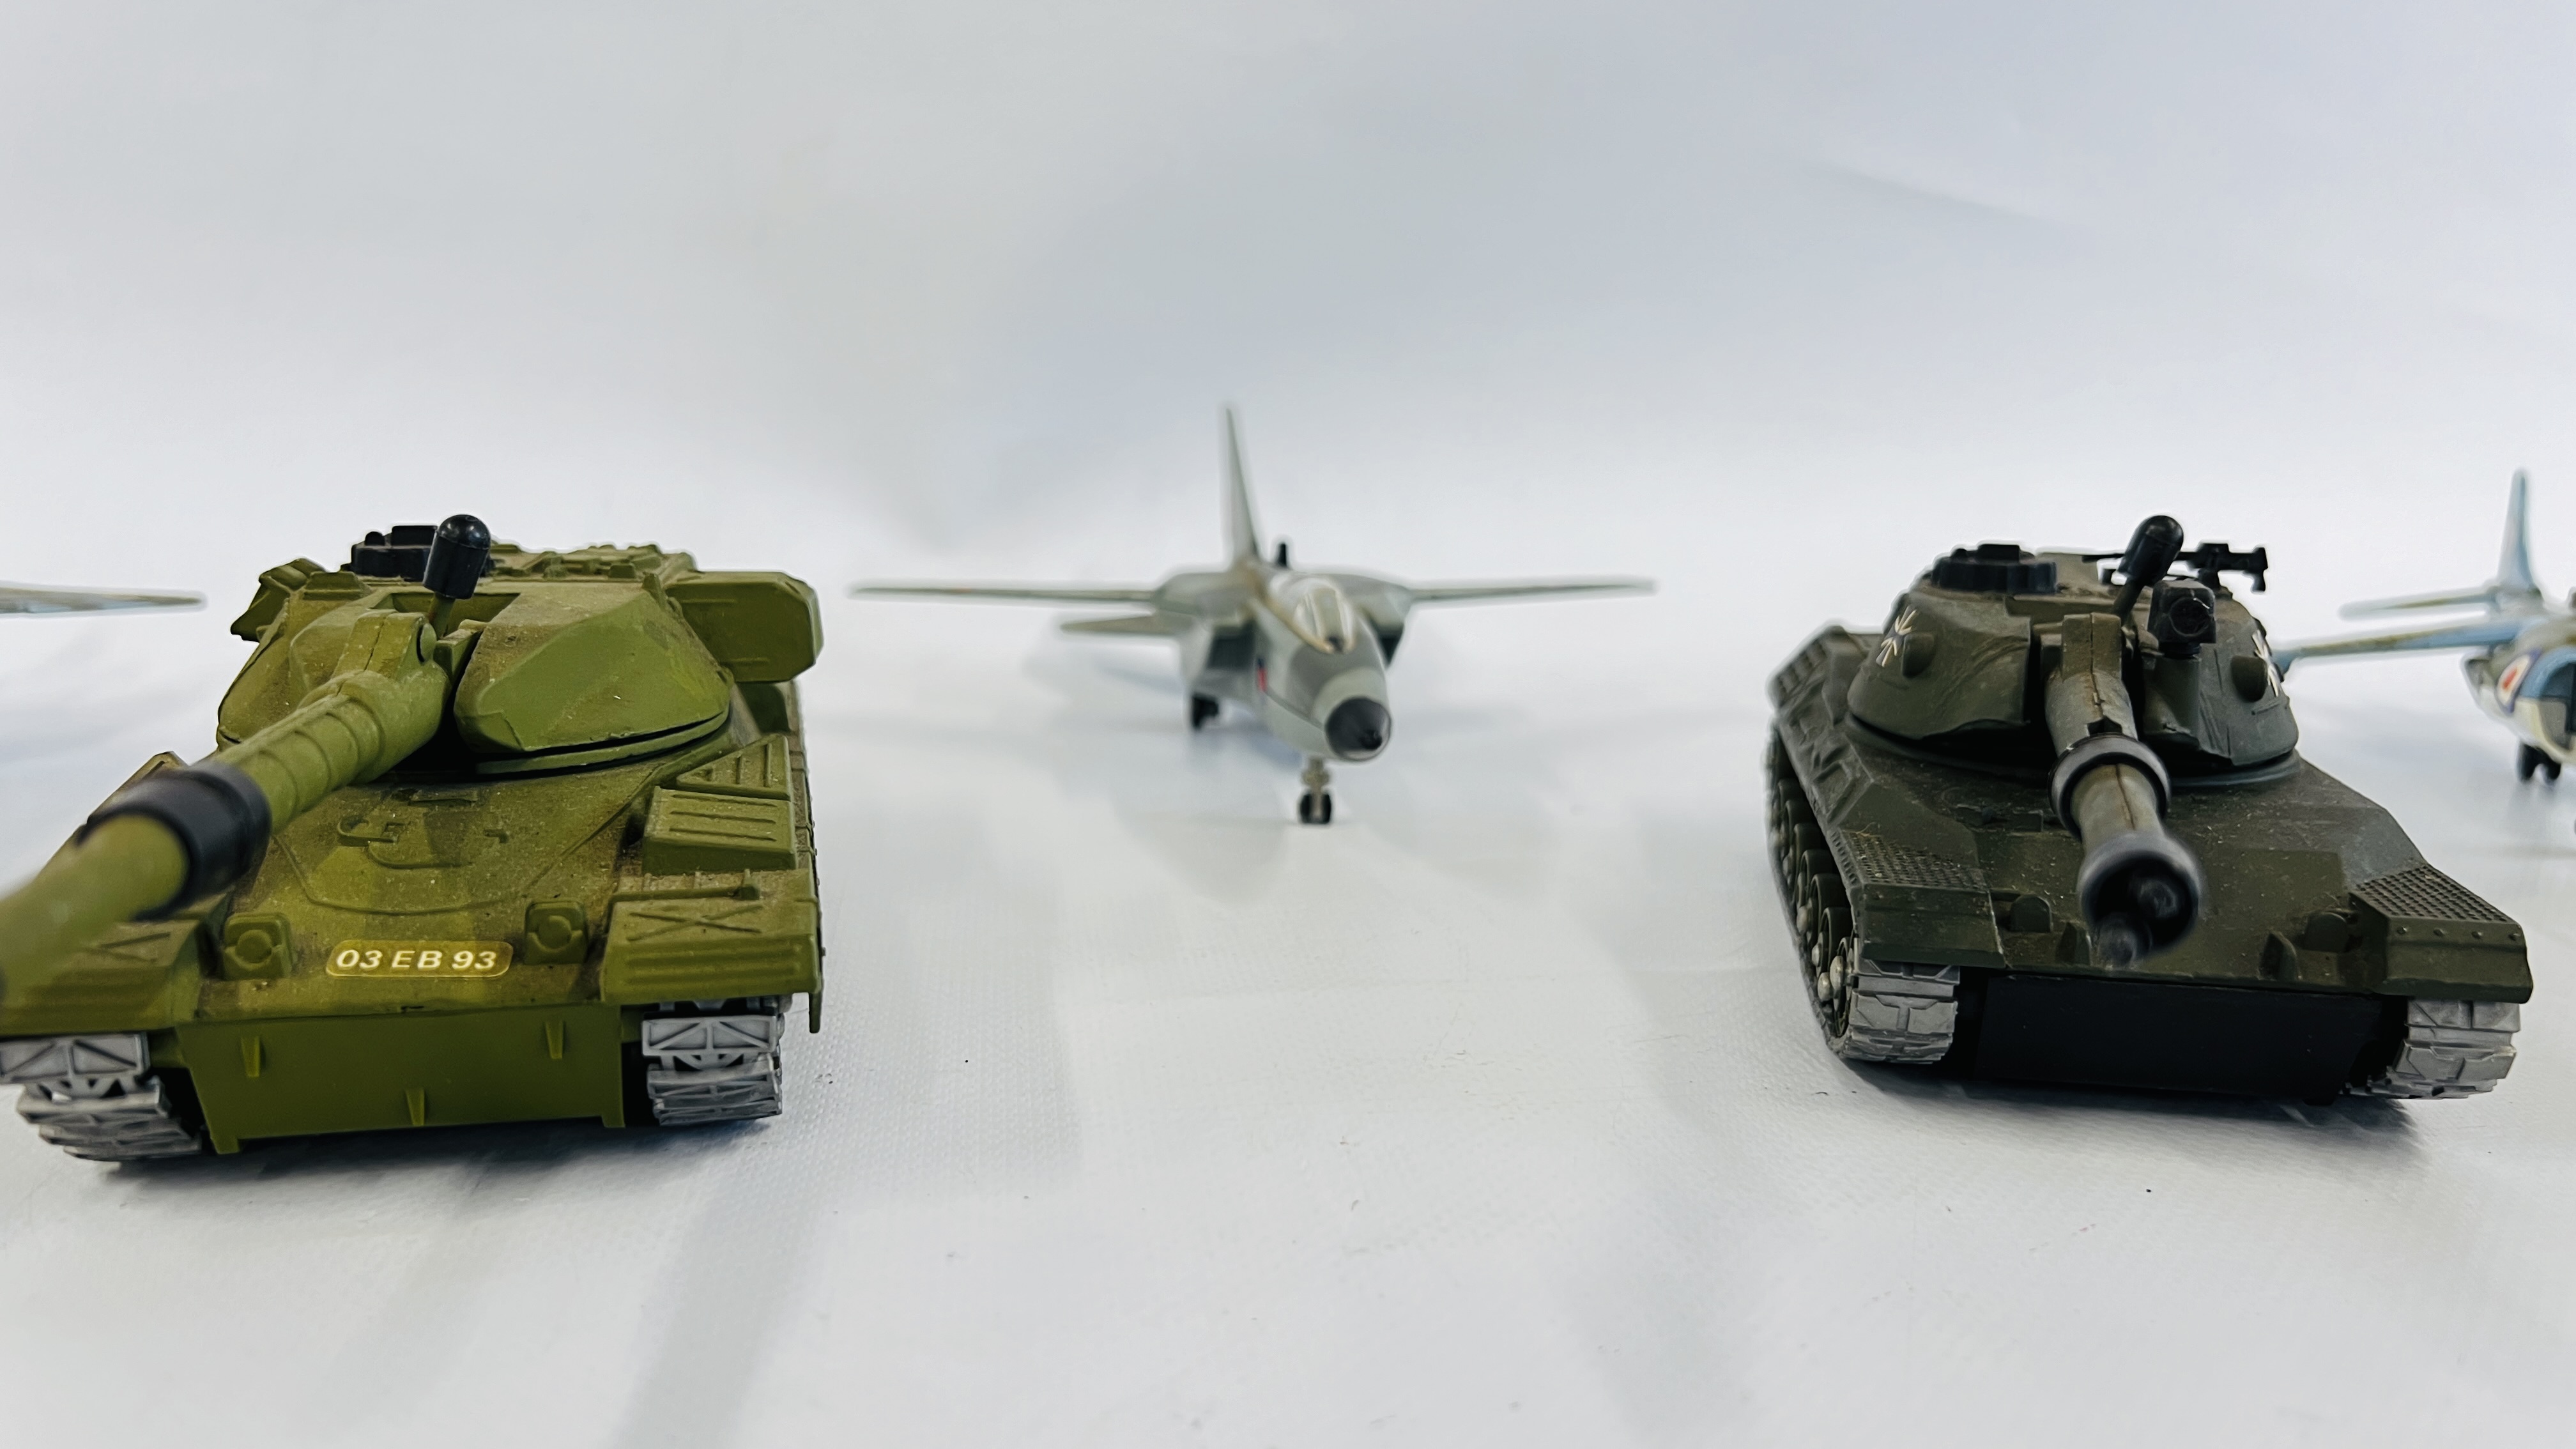 A GROUP OF 4 X DIE-CAST MILITARY DINKY TANKS ALONG WITH 4 X DIE-CAST DINKY FIGHTER PLANES / JETS. - Image 4 of 8